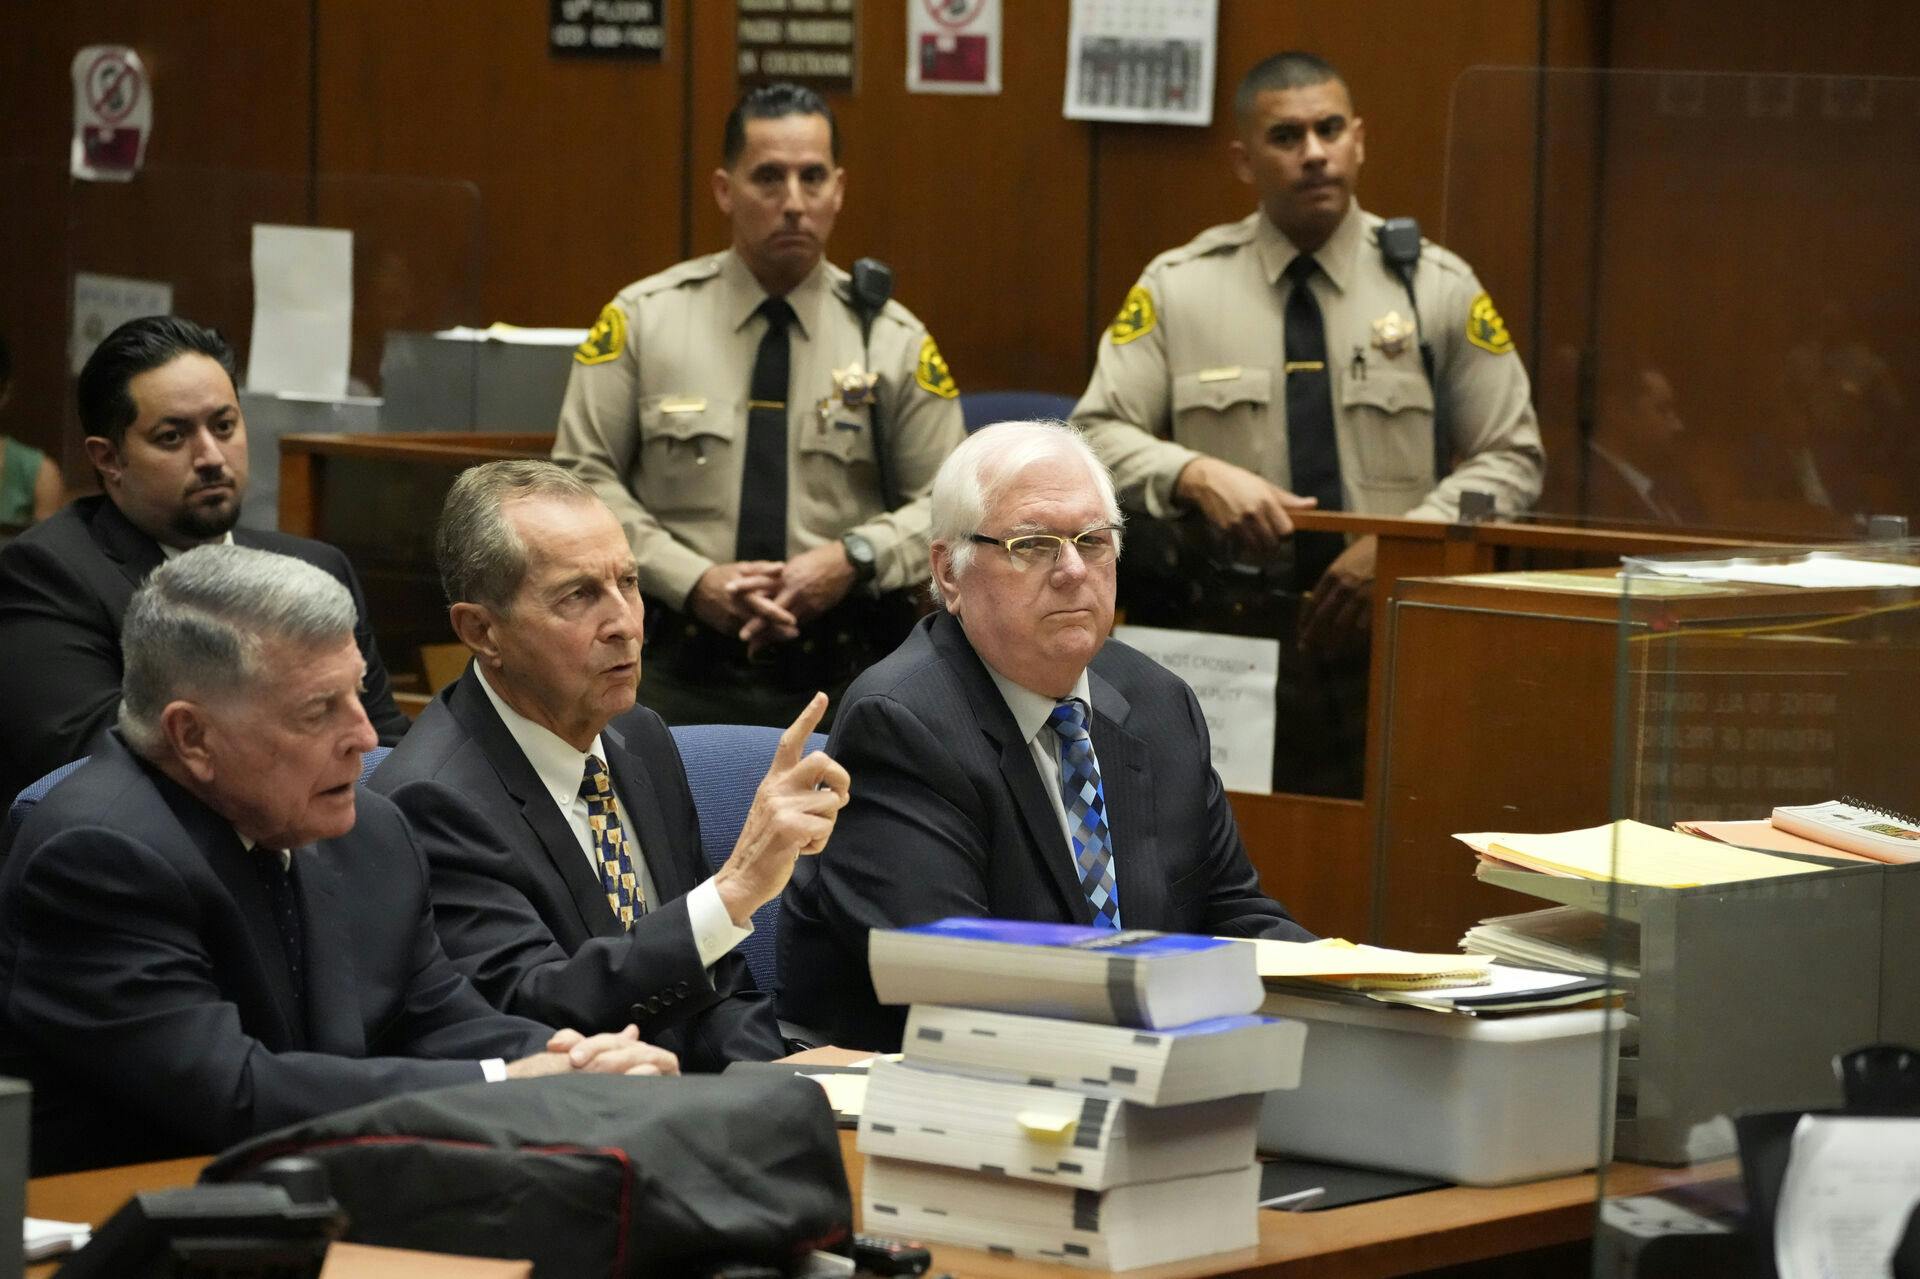 Orange County Superior Court Judge Jeffrey Ferguson, right, sits next to his attorneys John Drummond Barnett, left, and Paul Meyer during a hearing at the Clara Shortridge Foltz Criminal Justice Center, Tuesday, Aug. 15, 2023, in Los Angeles. The Southern California judge, Ferguson, charged with killing his wife during an argument while he was drunk, pleaded not guilty Tuesday, and his lawyer says it was an 'accidental shooting.' (AP Photo/Damian Dovarganes)